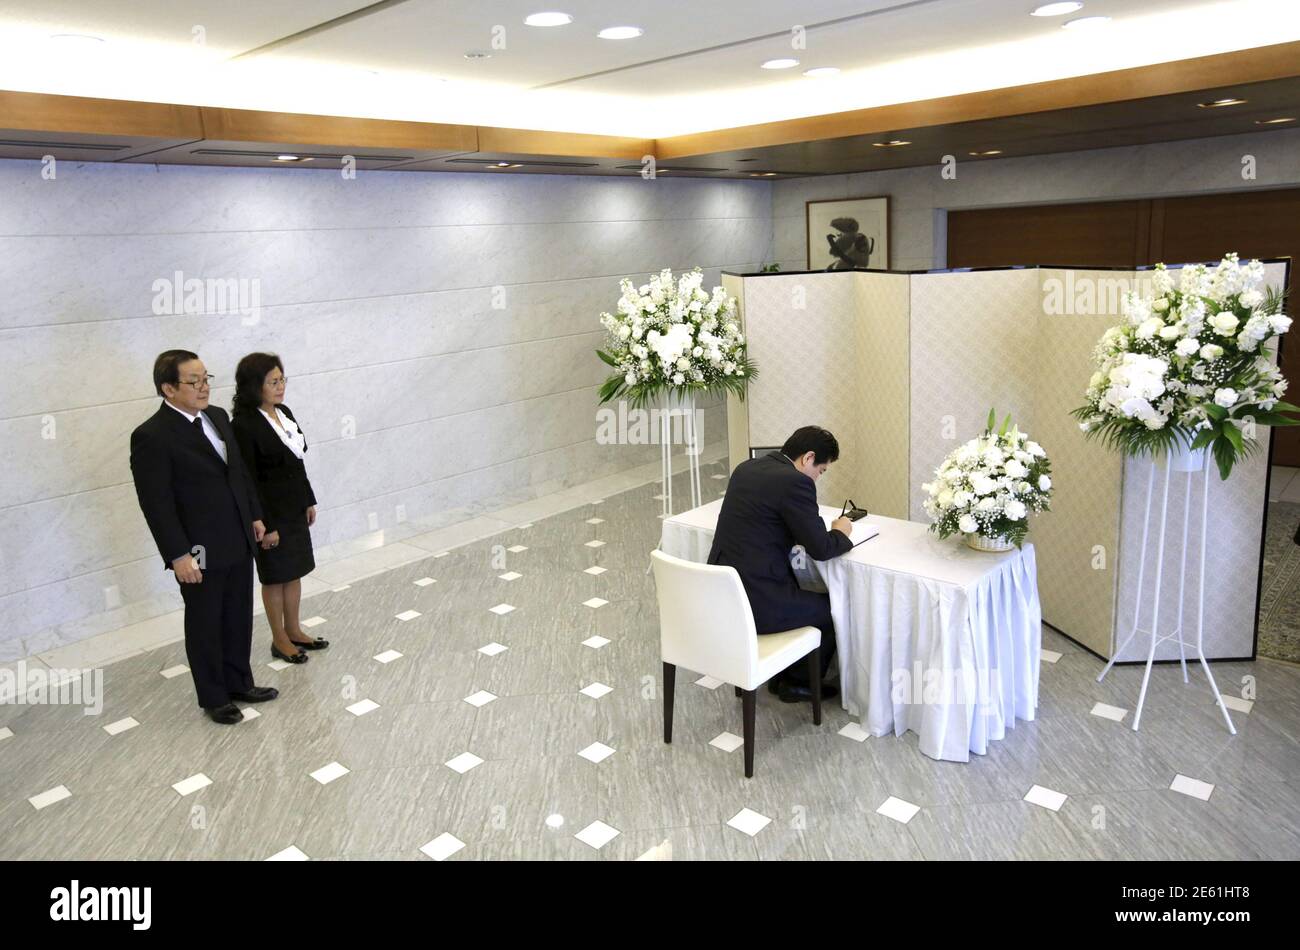 Japan's Prime Minister Shinzo Abe signs a condolences book for the late Lee Kuan Yew, former Prime Minister of Singapore, as Singapore's ambassador Chin Siat Yoon and his wife Wang Lee Moi observe at the Singapore Embassy in Tokyo March 24, 2015. Lee, Singapore's first prime minister and architect of the tiny Southeast Asian city-state's rapid rise from British tropical outpost to global trade and financial centre, died early on Monday, aged 91, the Prime Minister's Office said. REUTERS/Eugene Hoshiko/Pool Stock Photo